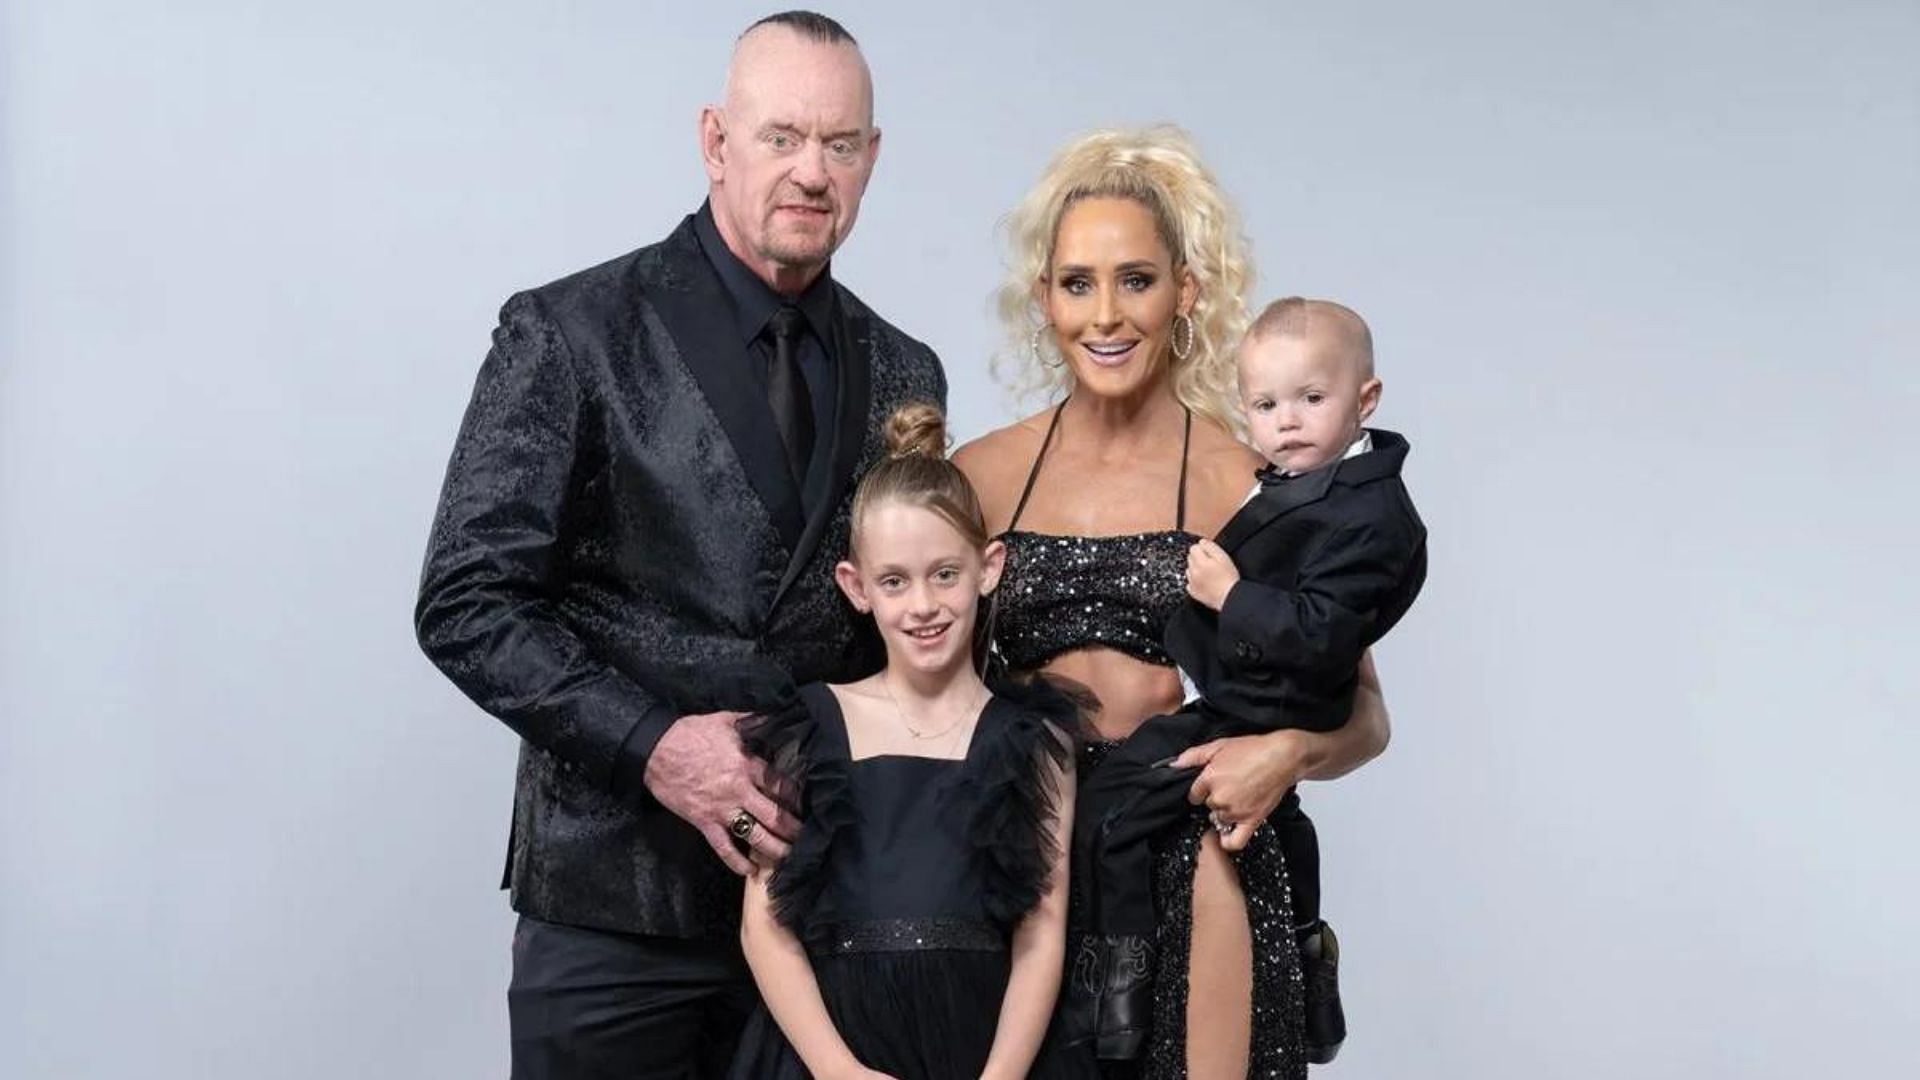 The Undertaker Son: The Undertaker's son training for a WWE future ...